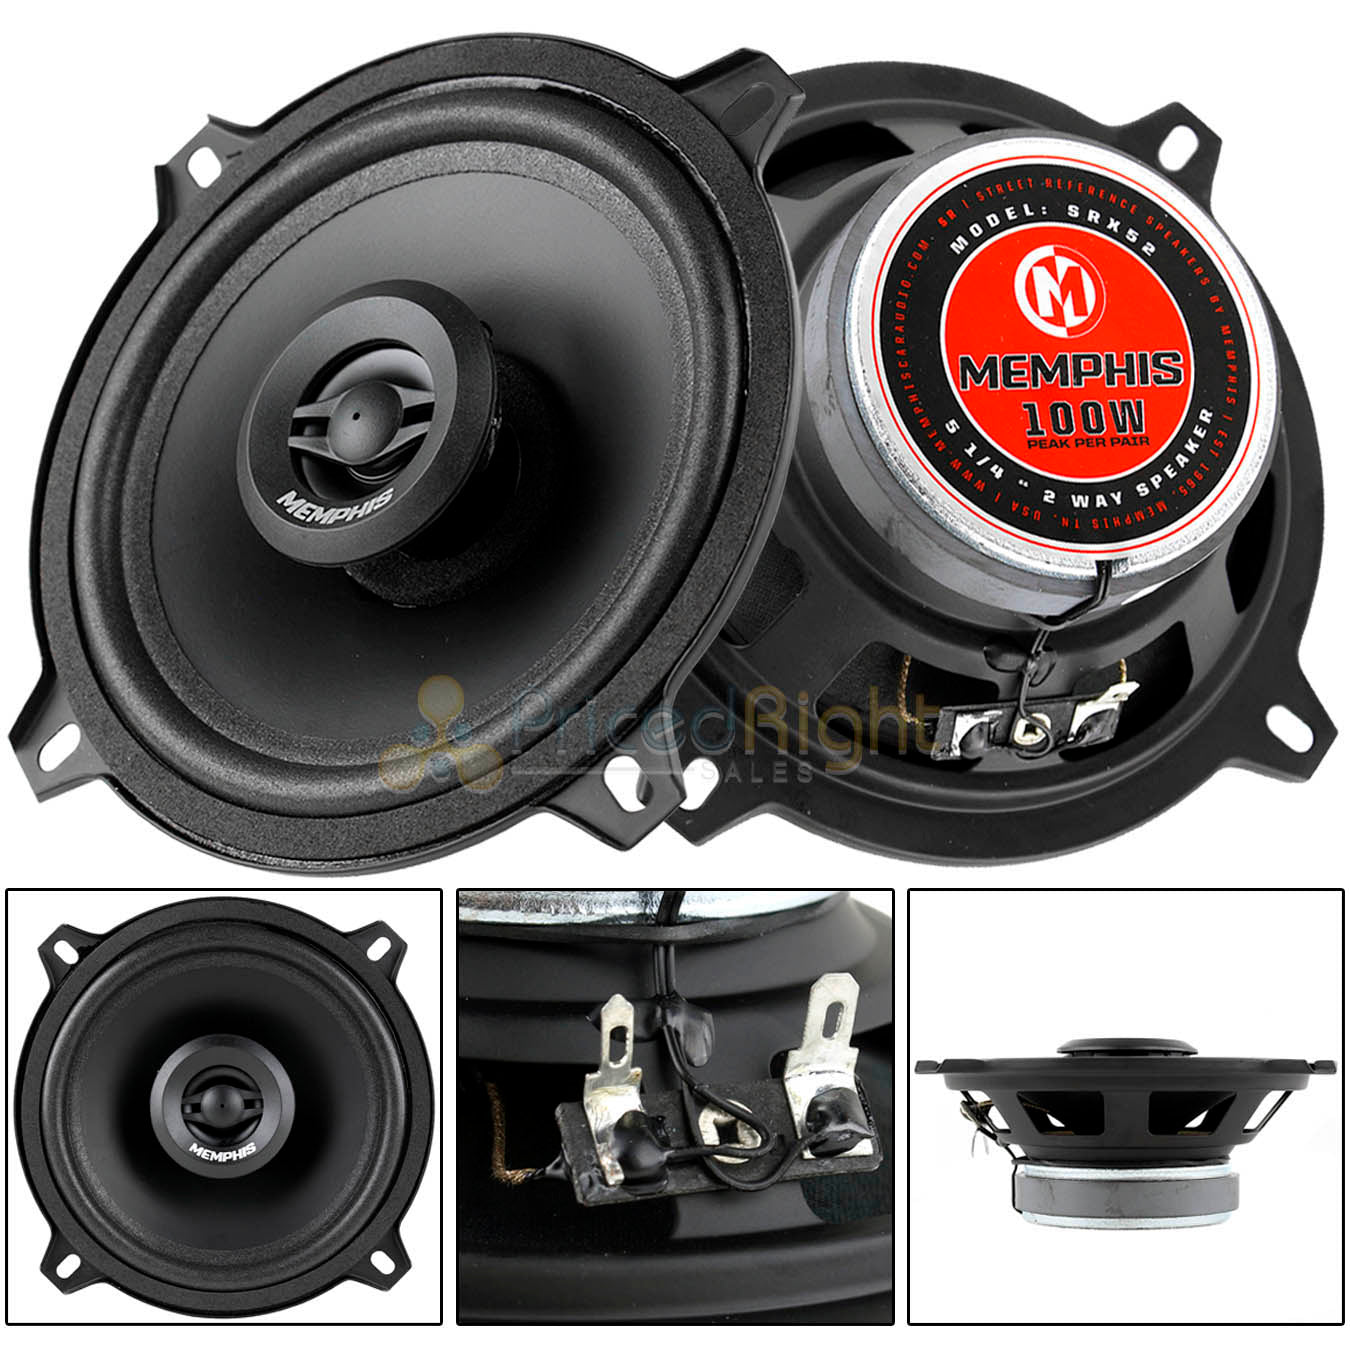 2 Memphis Audio 5.25" 2 Way Coaxial Speakers 50 Watts Max Street Reference SRX52